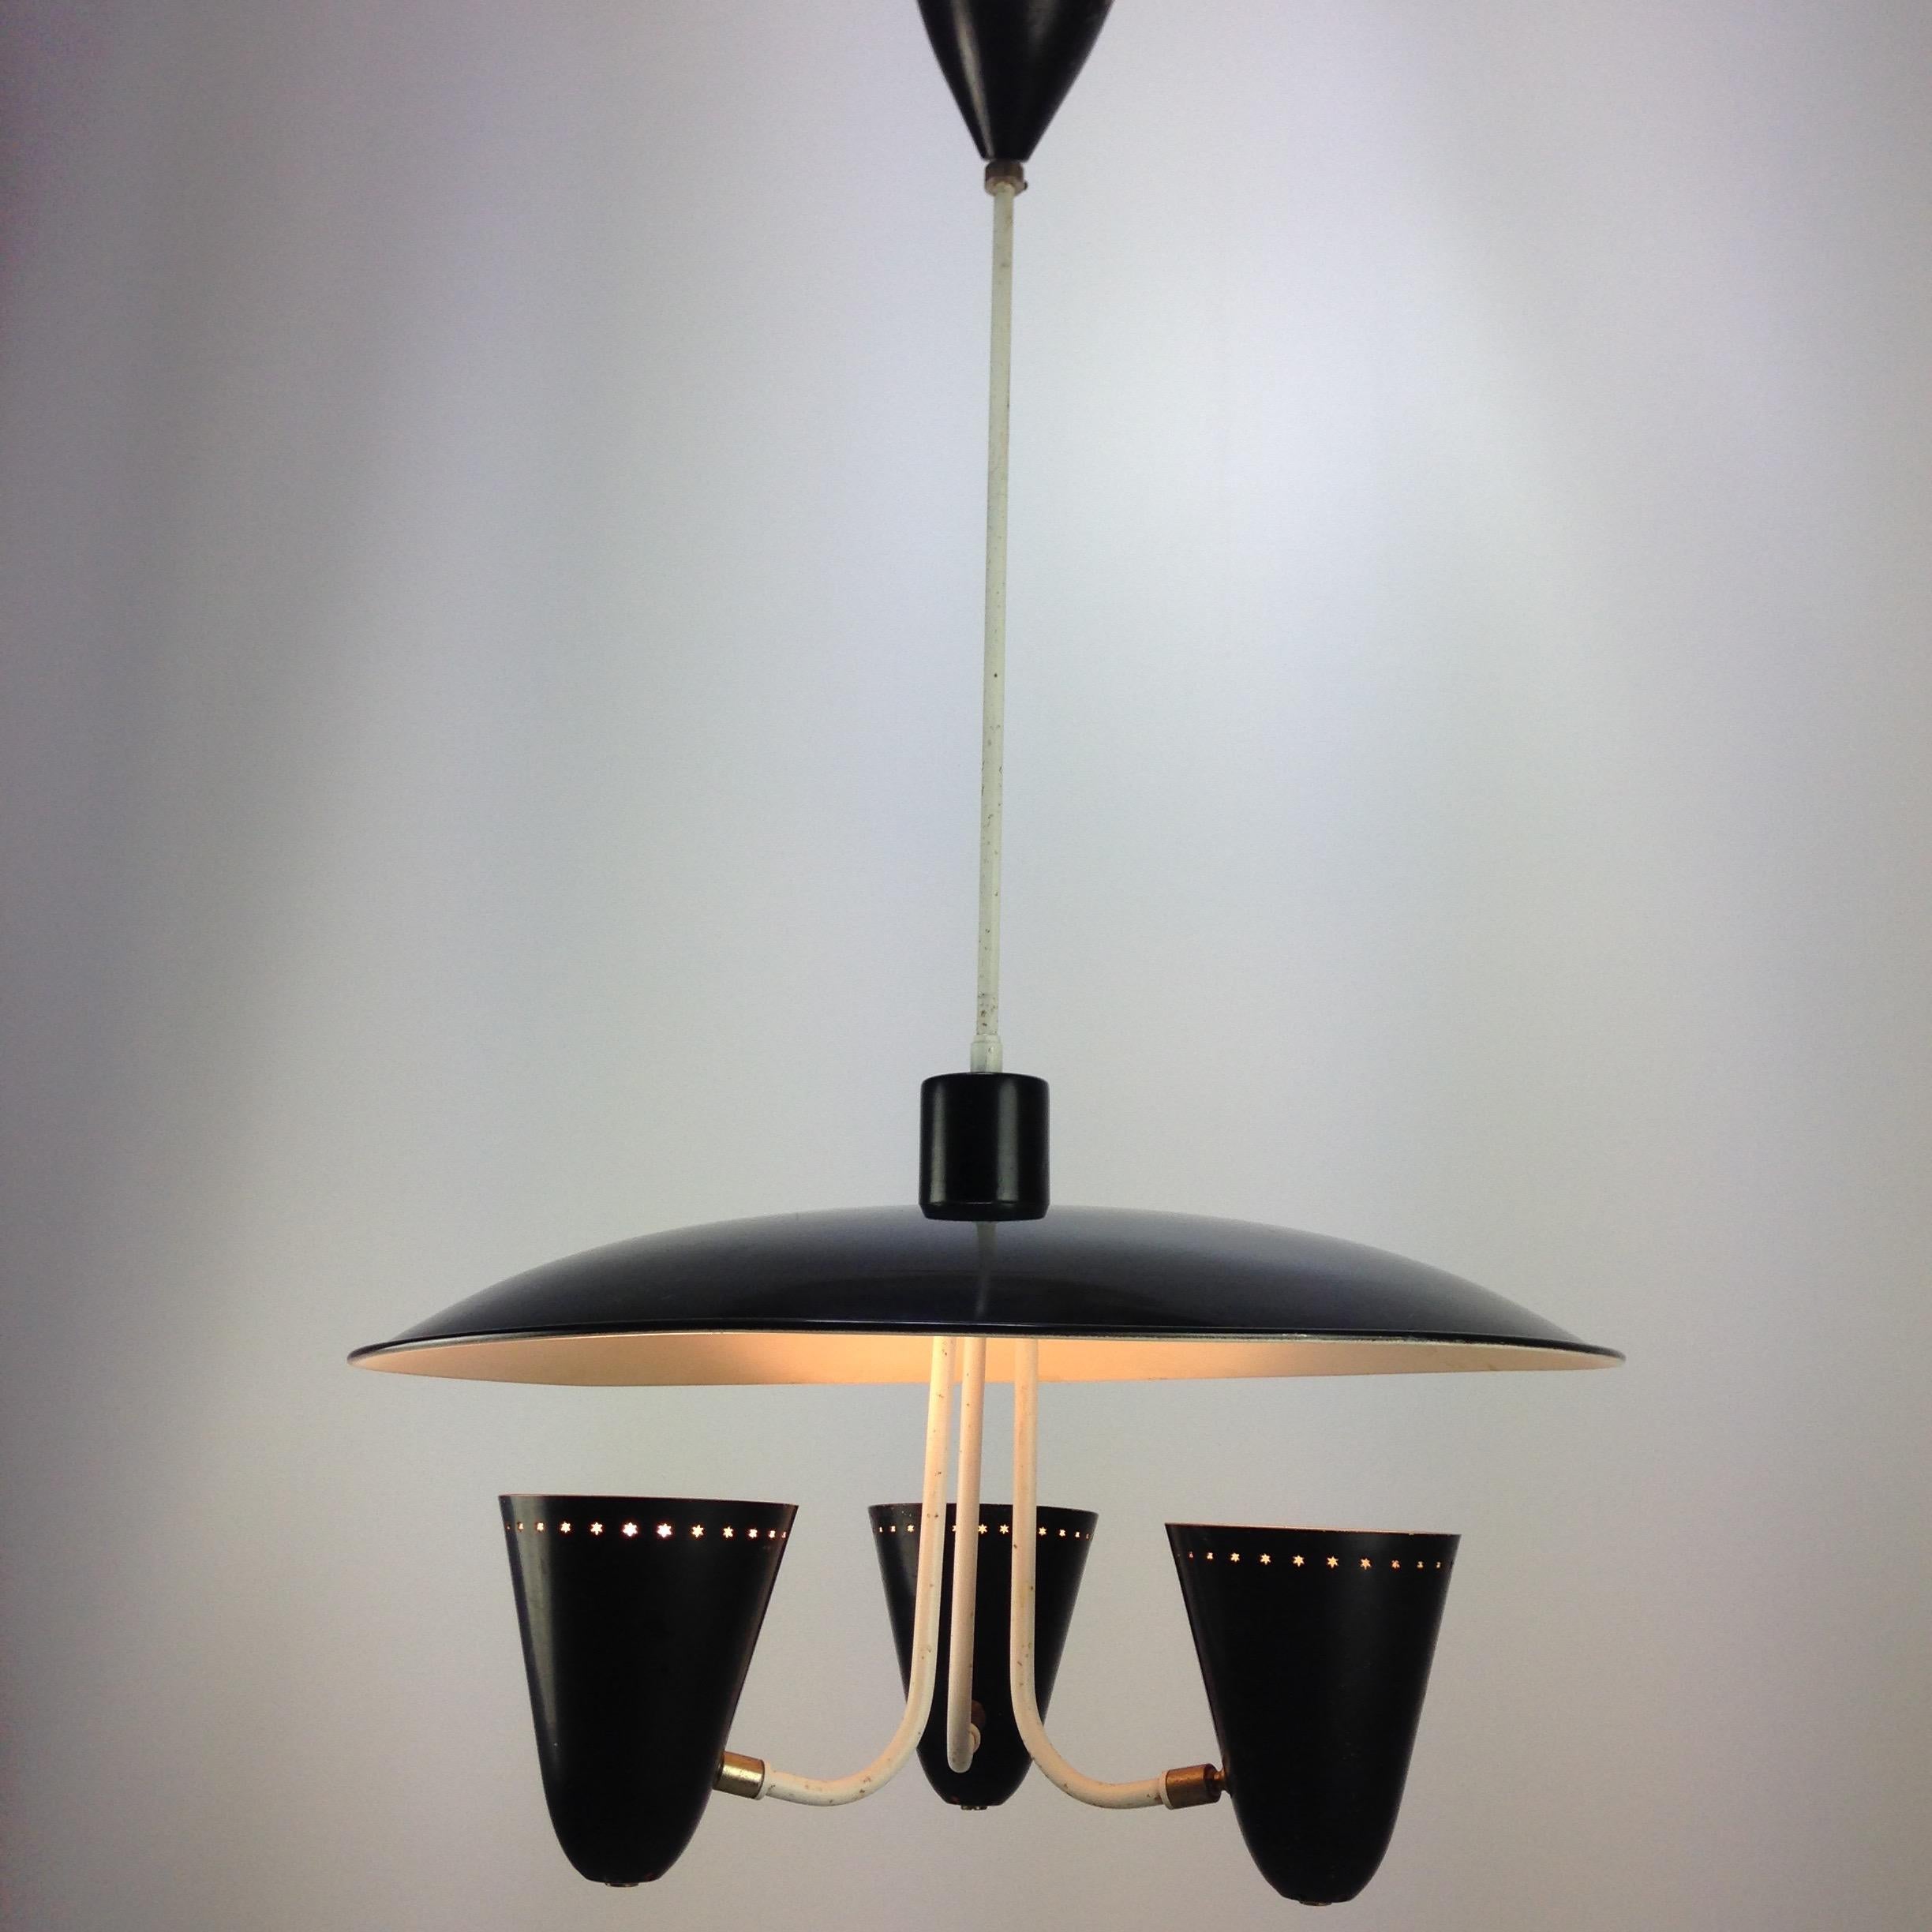 Mid-Century Modern Mid Century Ceiling Light by H. Th. J. A. Busquet for Hala, 1950's For Sale